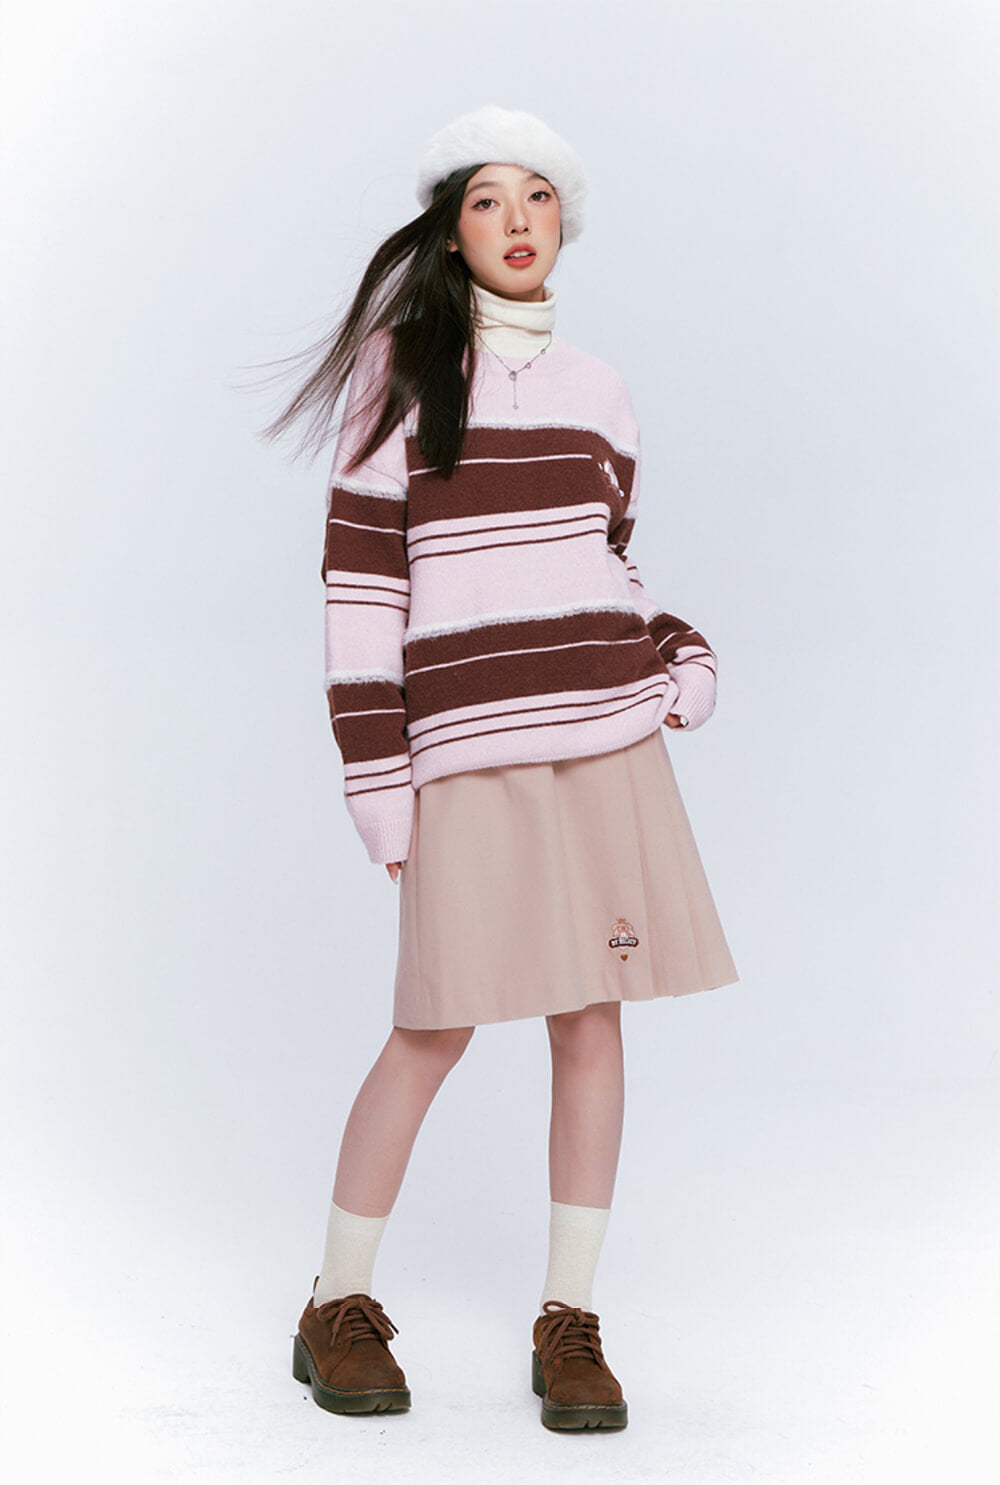 japanese-girl-fashion-my-melody-outfit-with-khaki-woolen-long-pleated-skirt-and-pink-striped-knit-jumper-and-white-beret